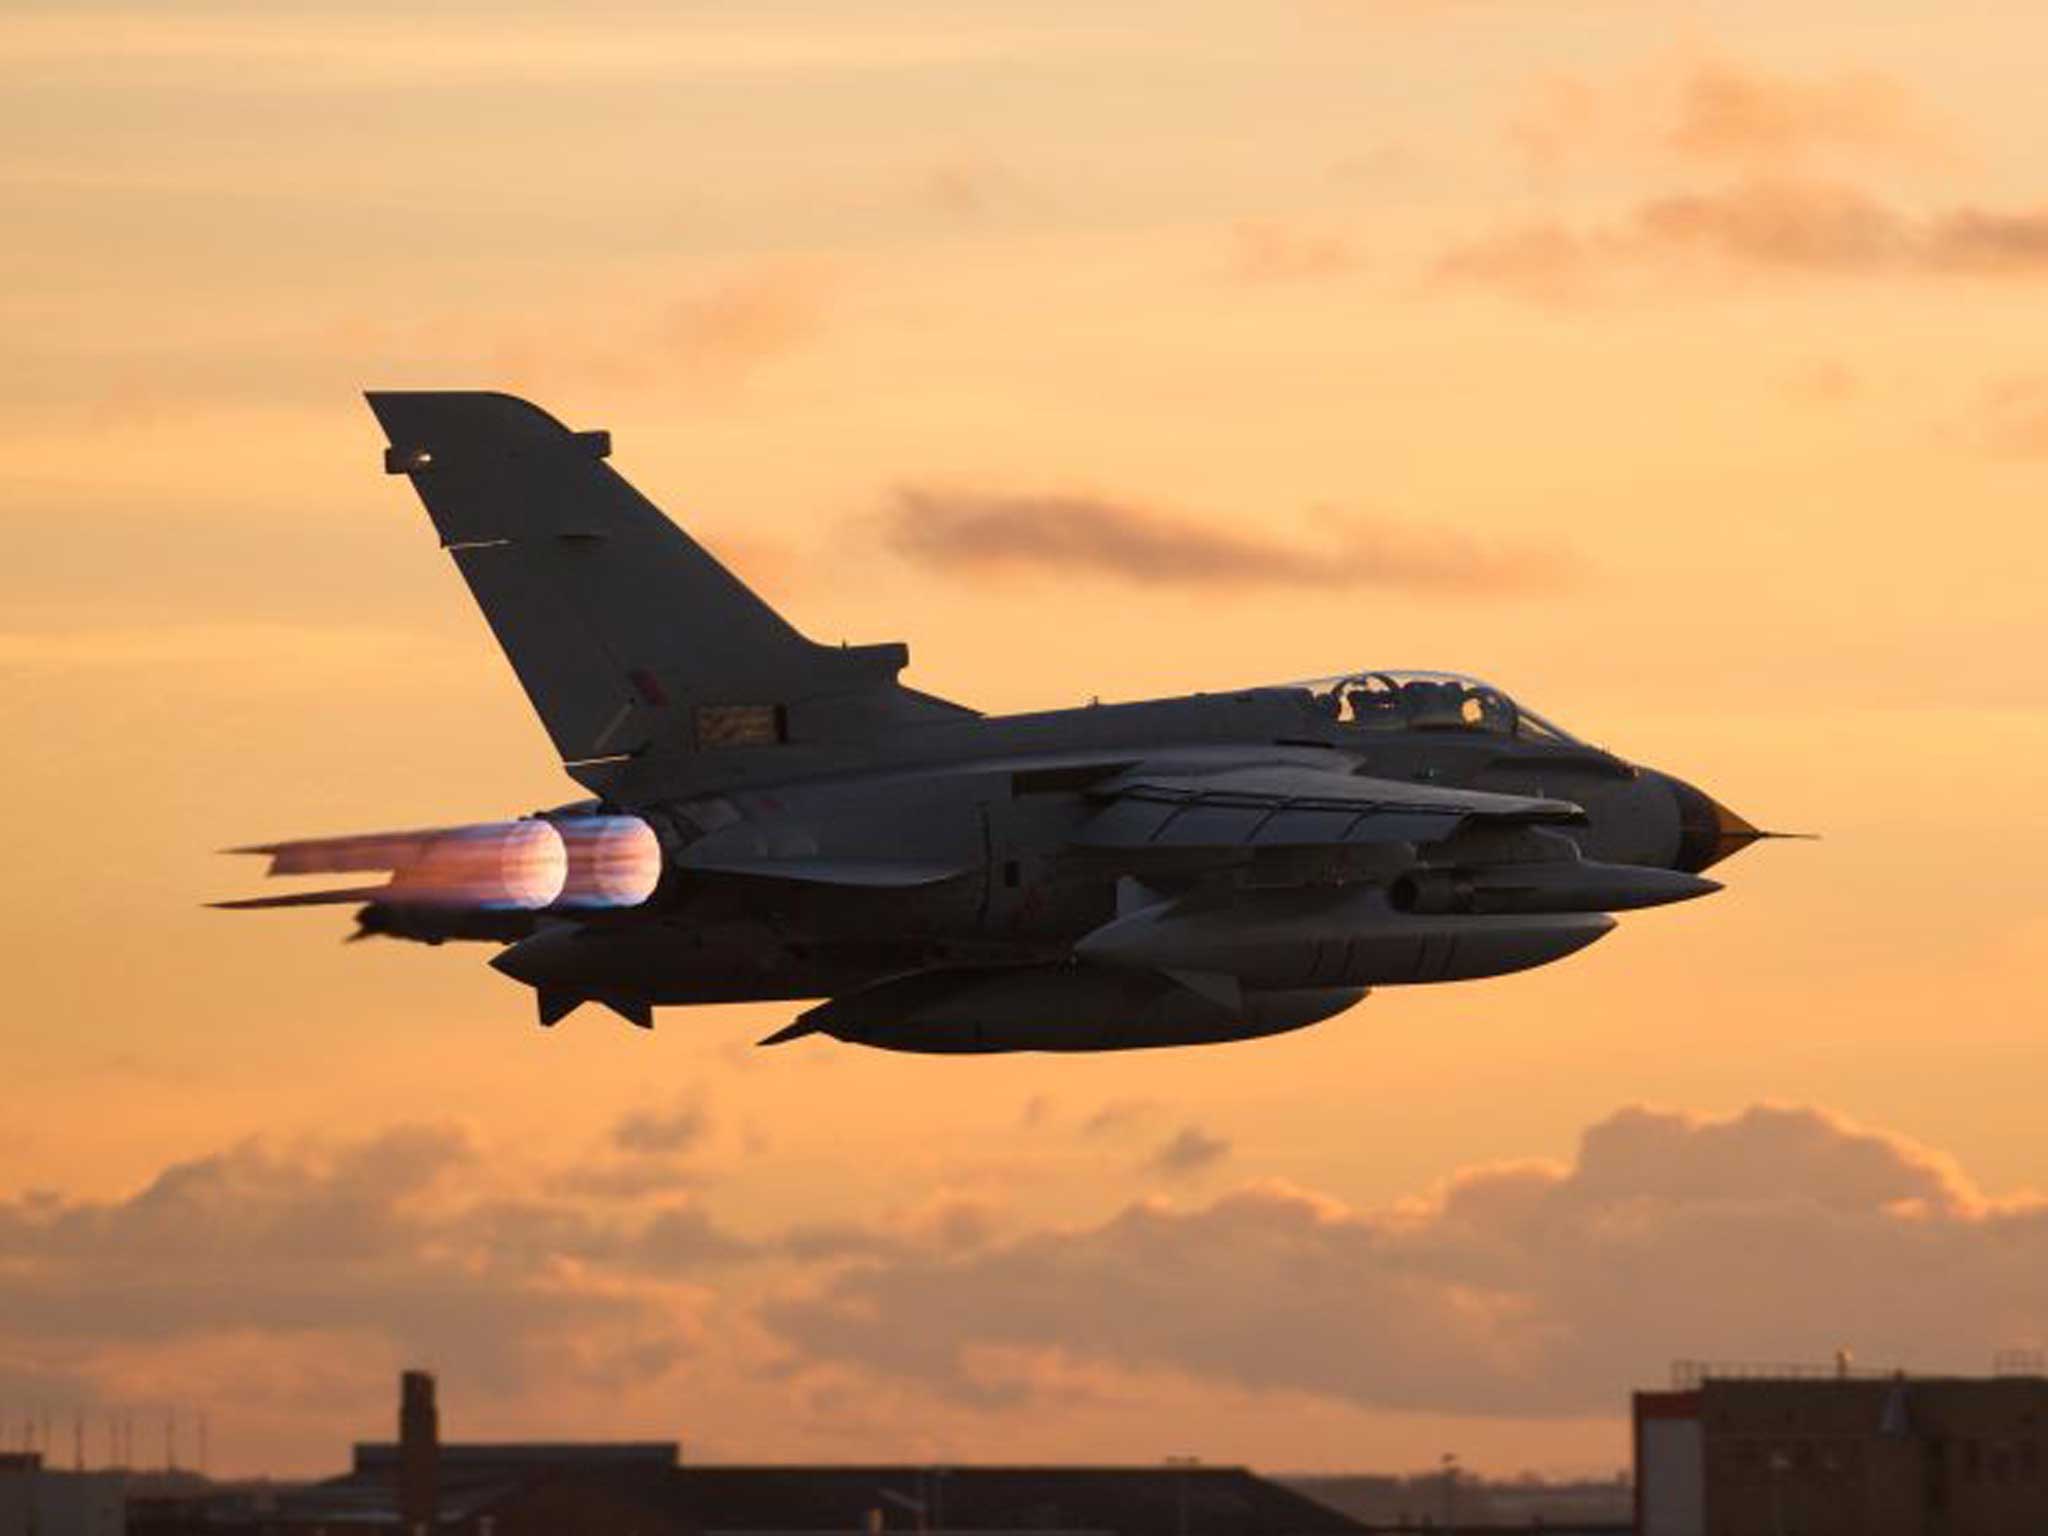 A Tornado jet flying during a trial of 3D printed components, manufactured by the defence contractor, which could lead the way for further military use on the type